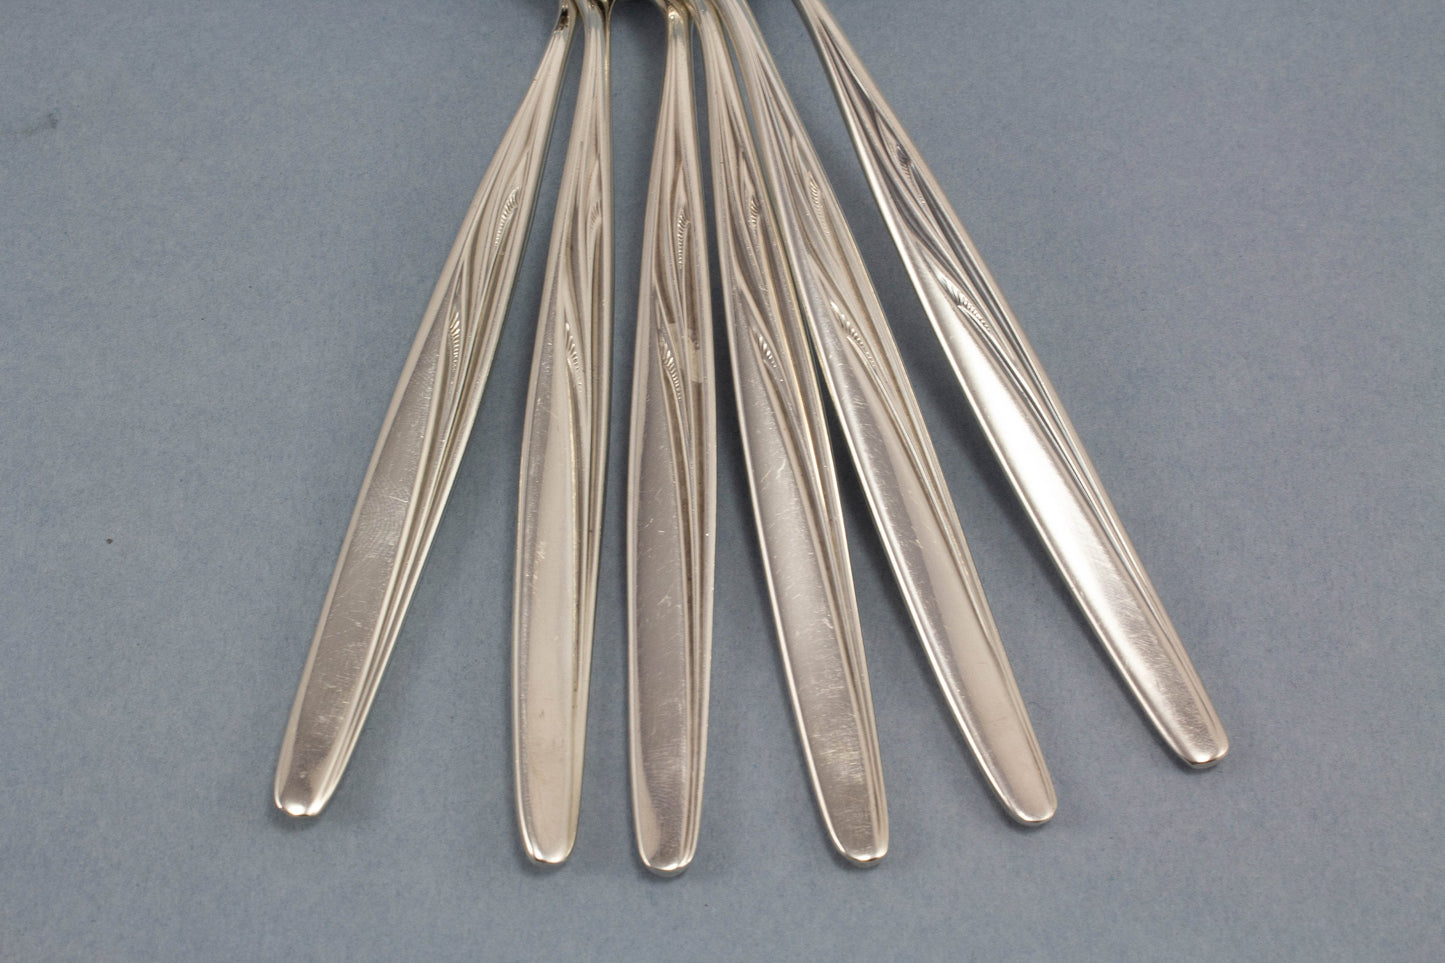 8 silver plated cup spoon, soup spoon, WMF Heidelberg